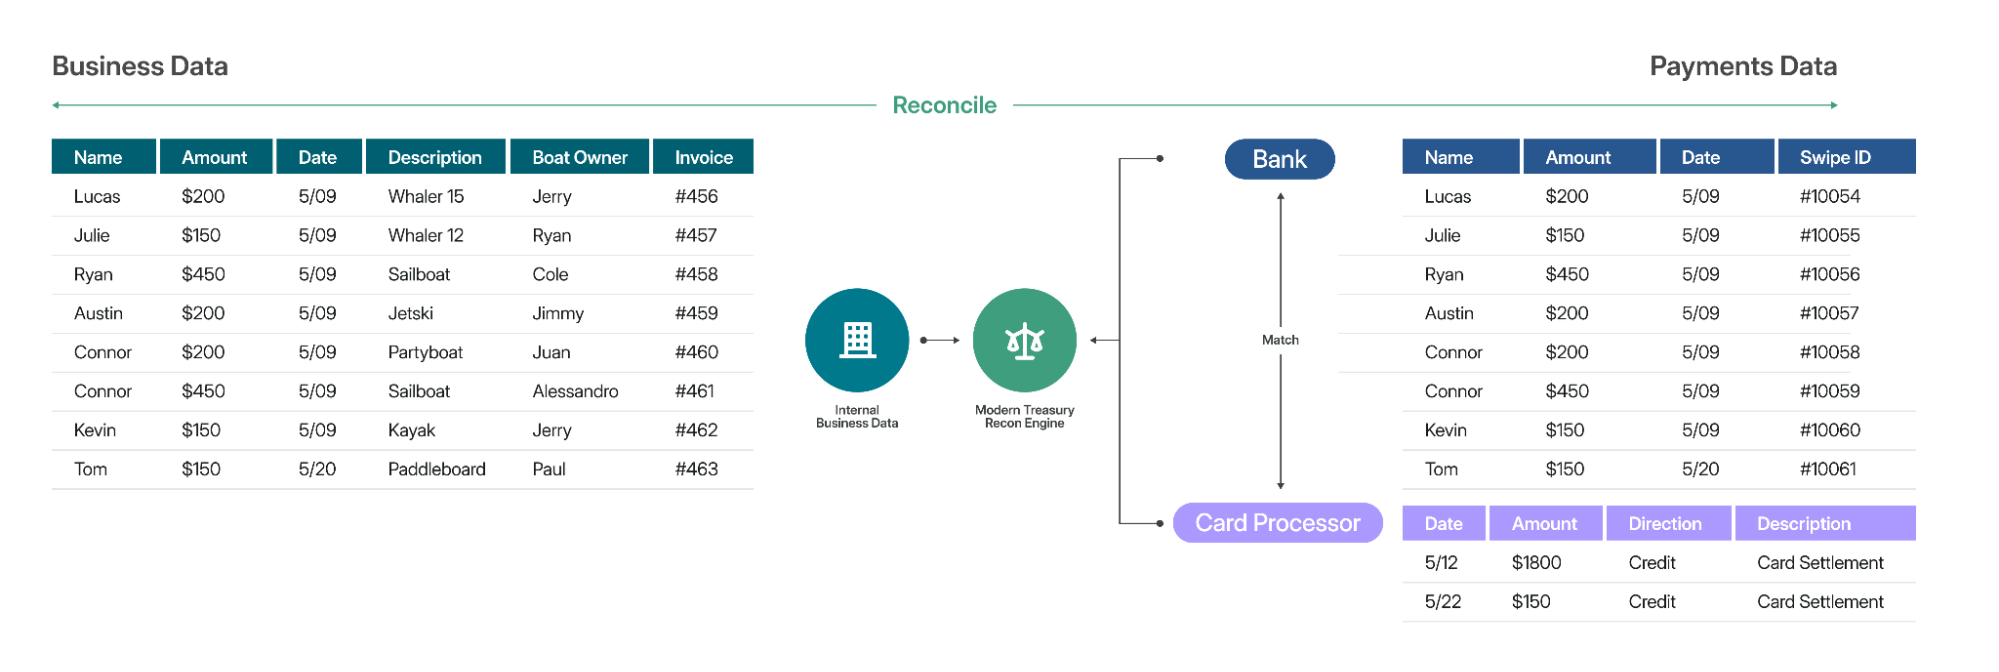 A detailed illustration of how Modern Treasury maps business data to payments data.